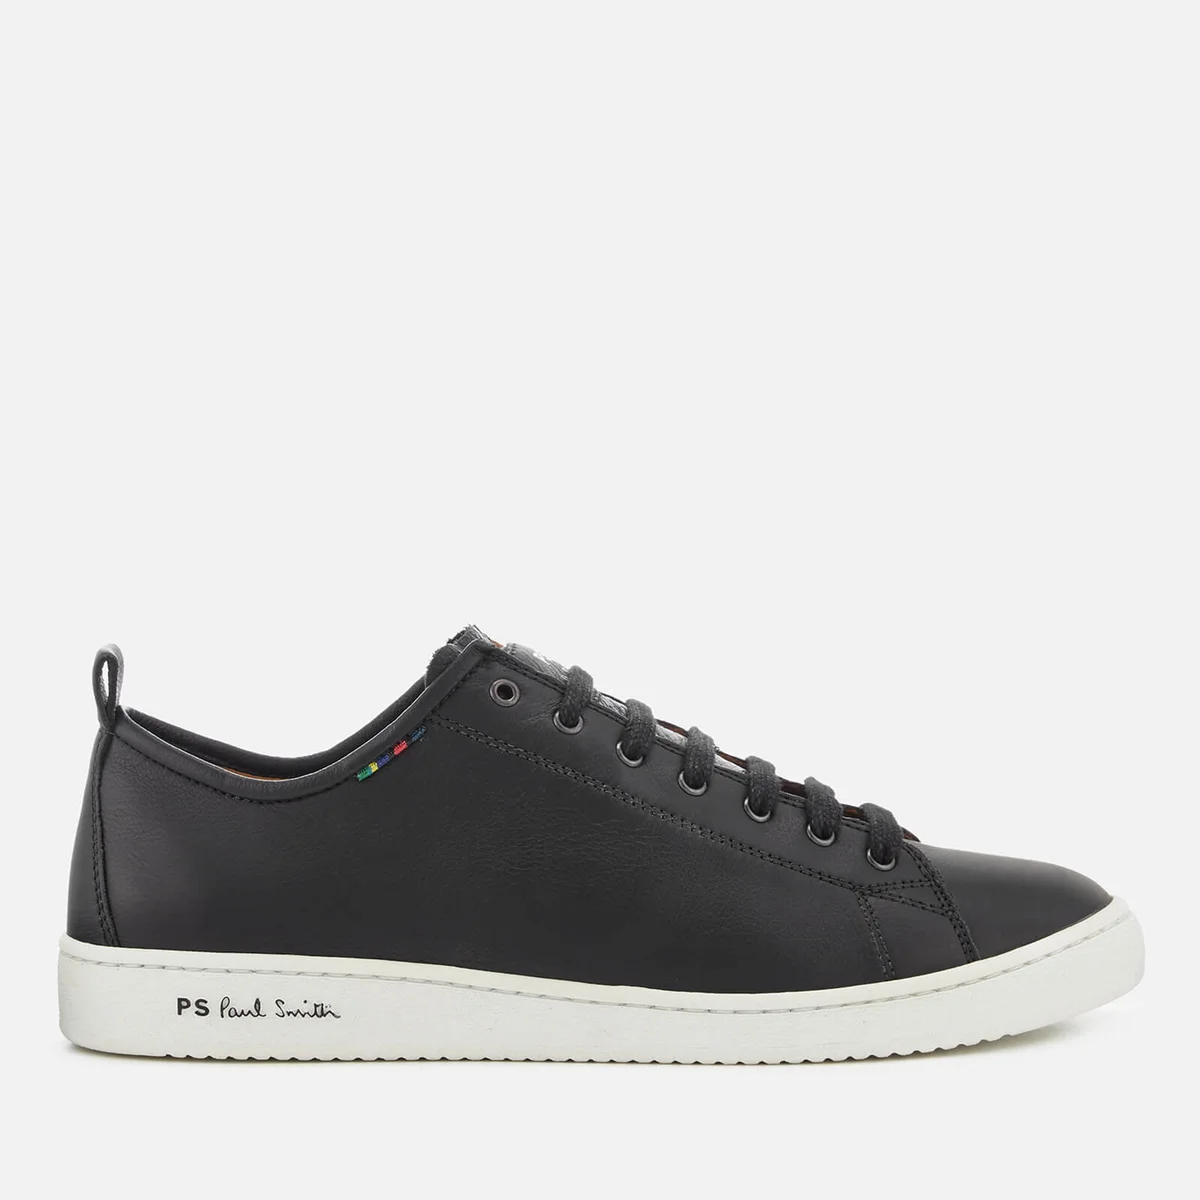 PS Paul Smith Men's Miyata Leather Low Top Trainers - Black Image 1